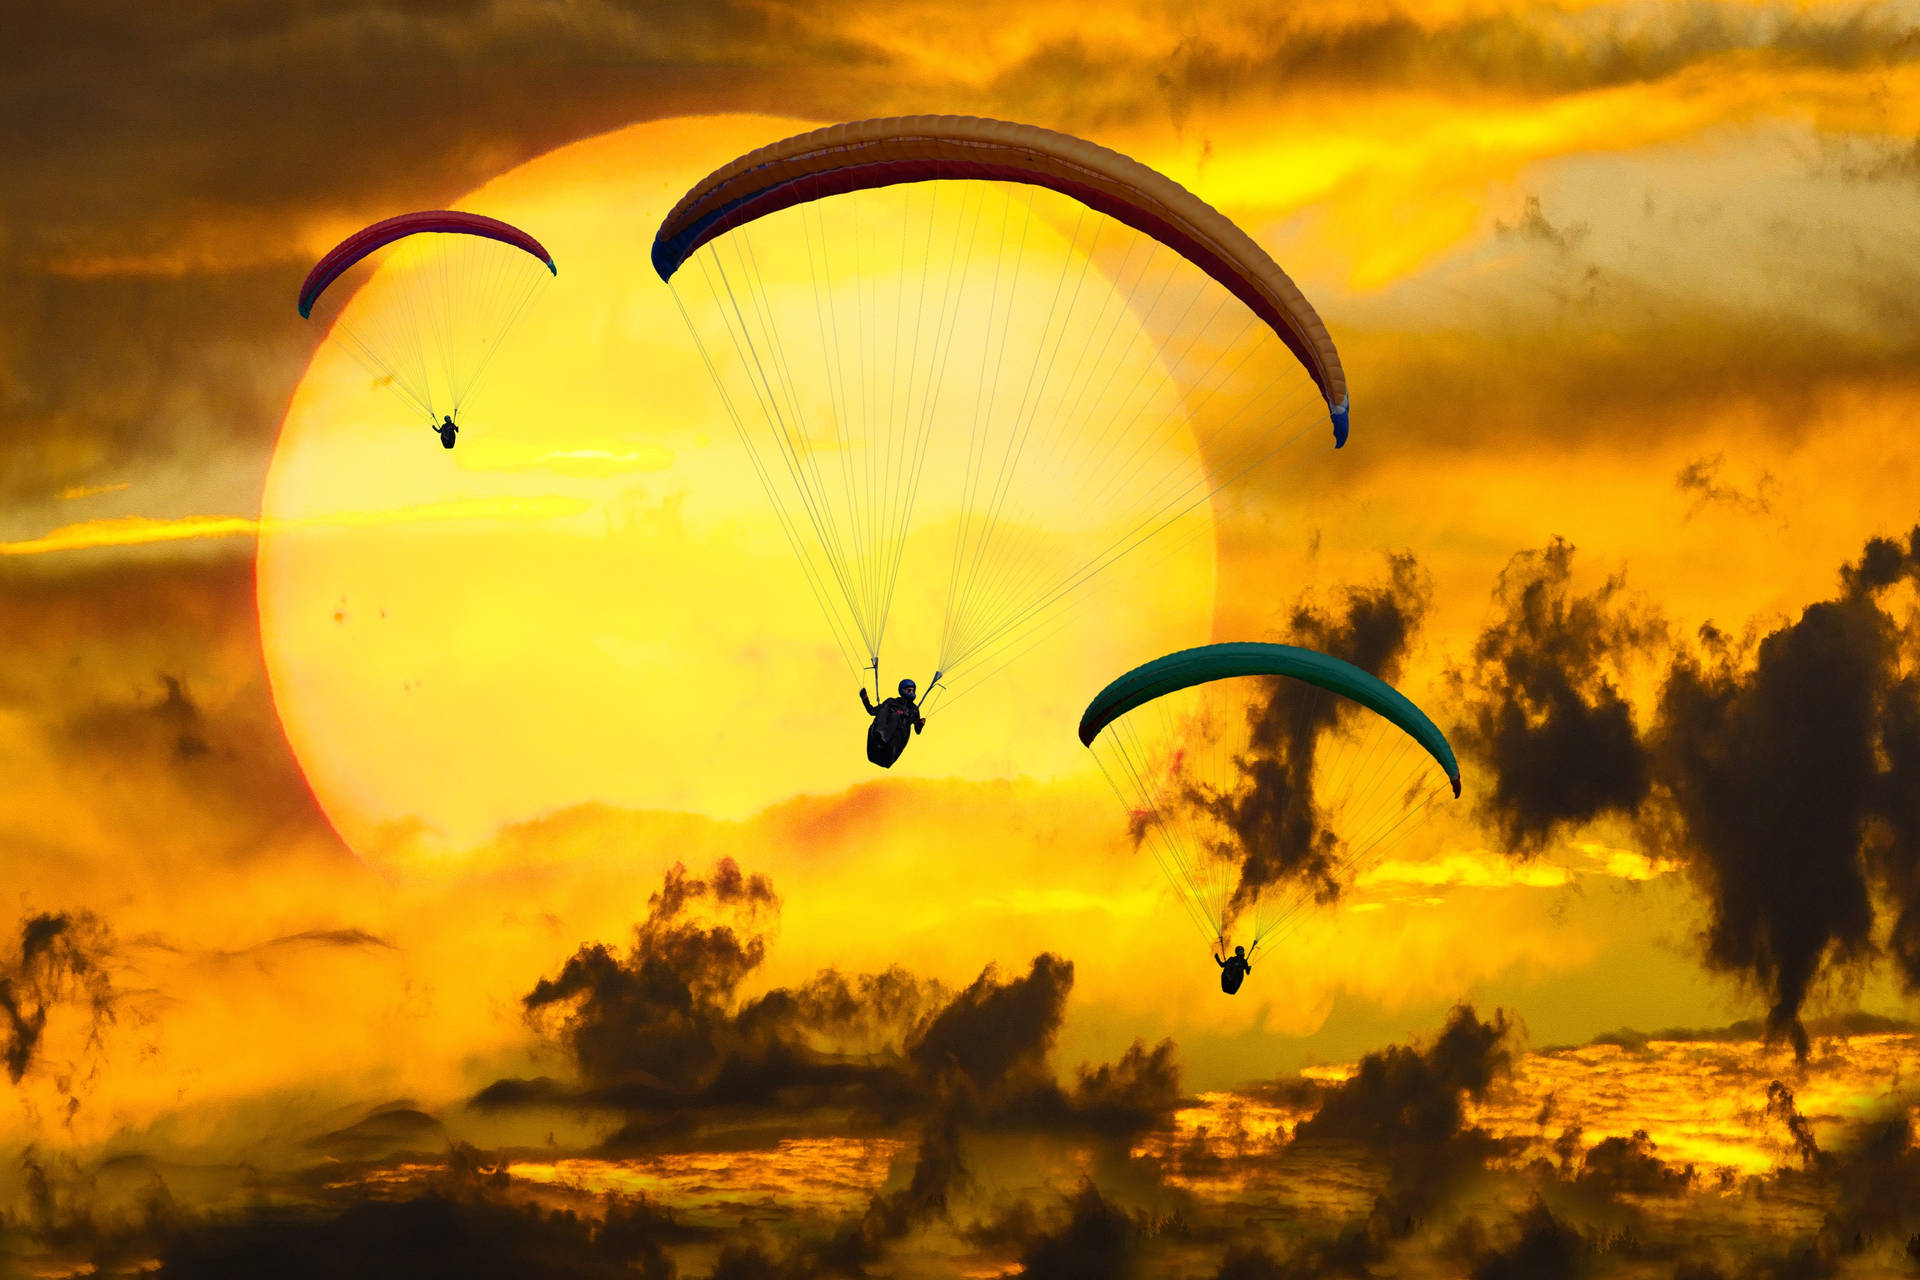 Paragliding With Sunset Scenery Background